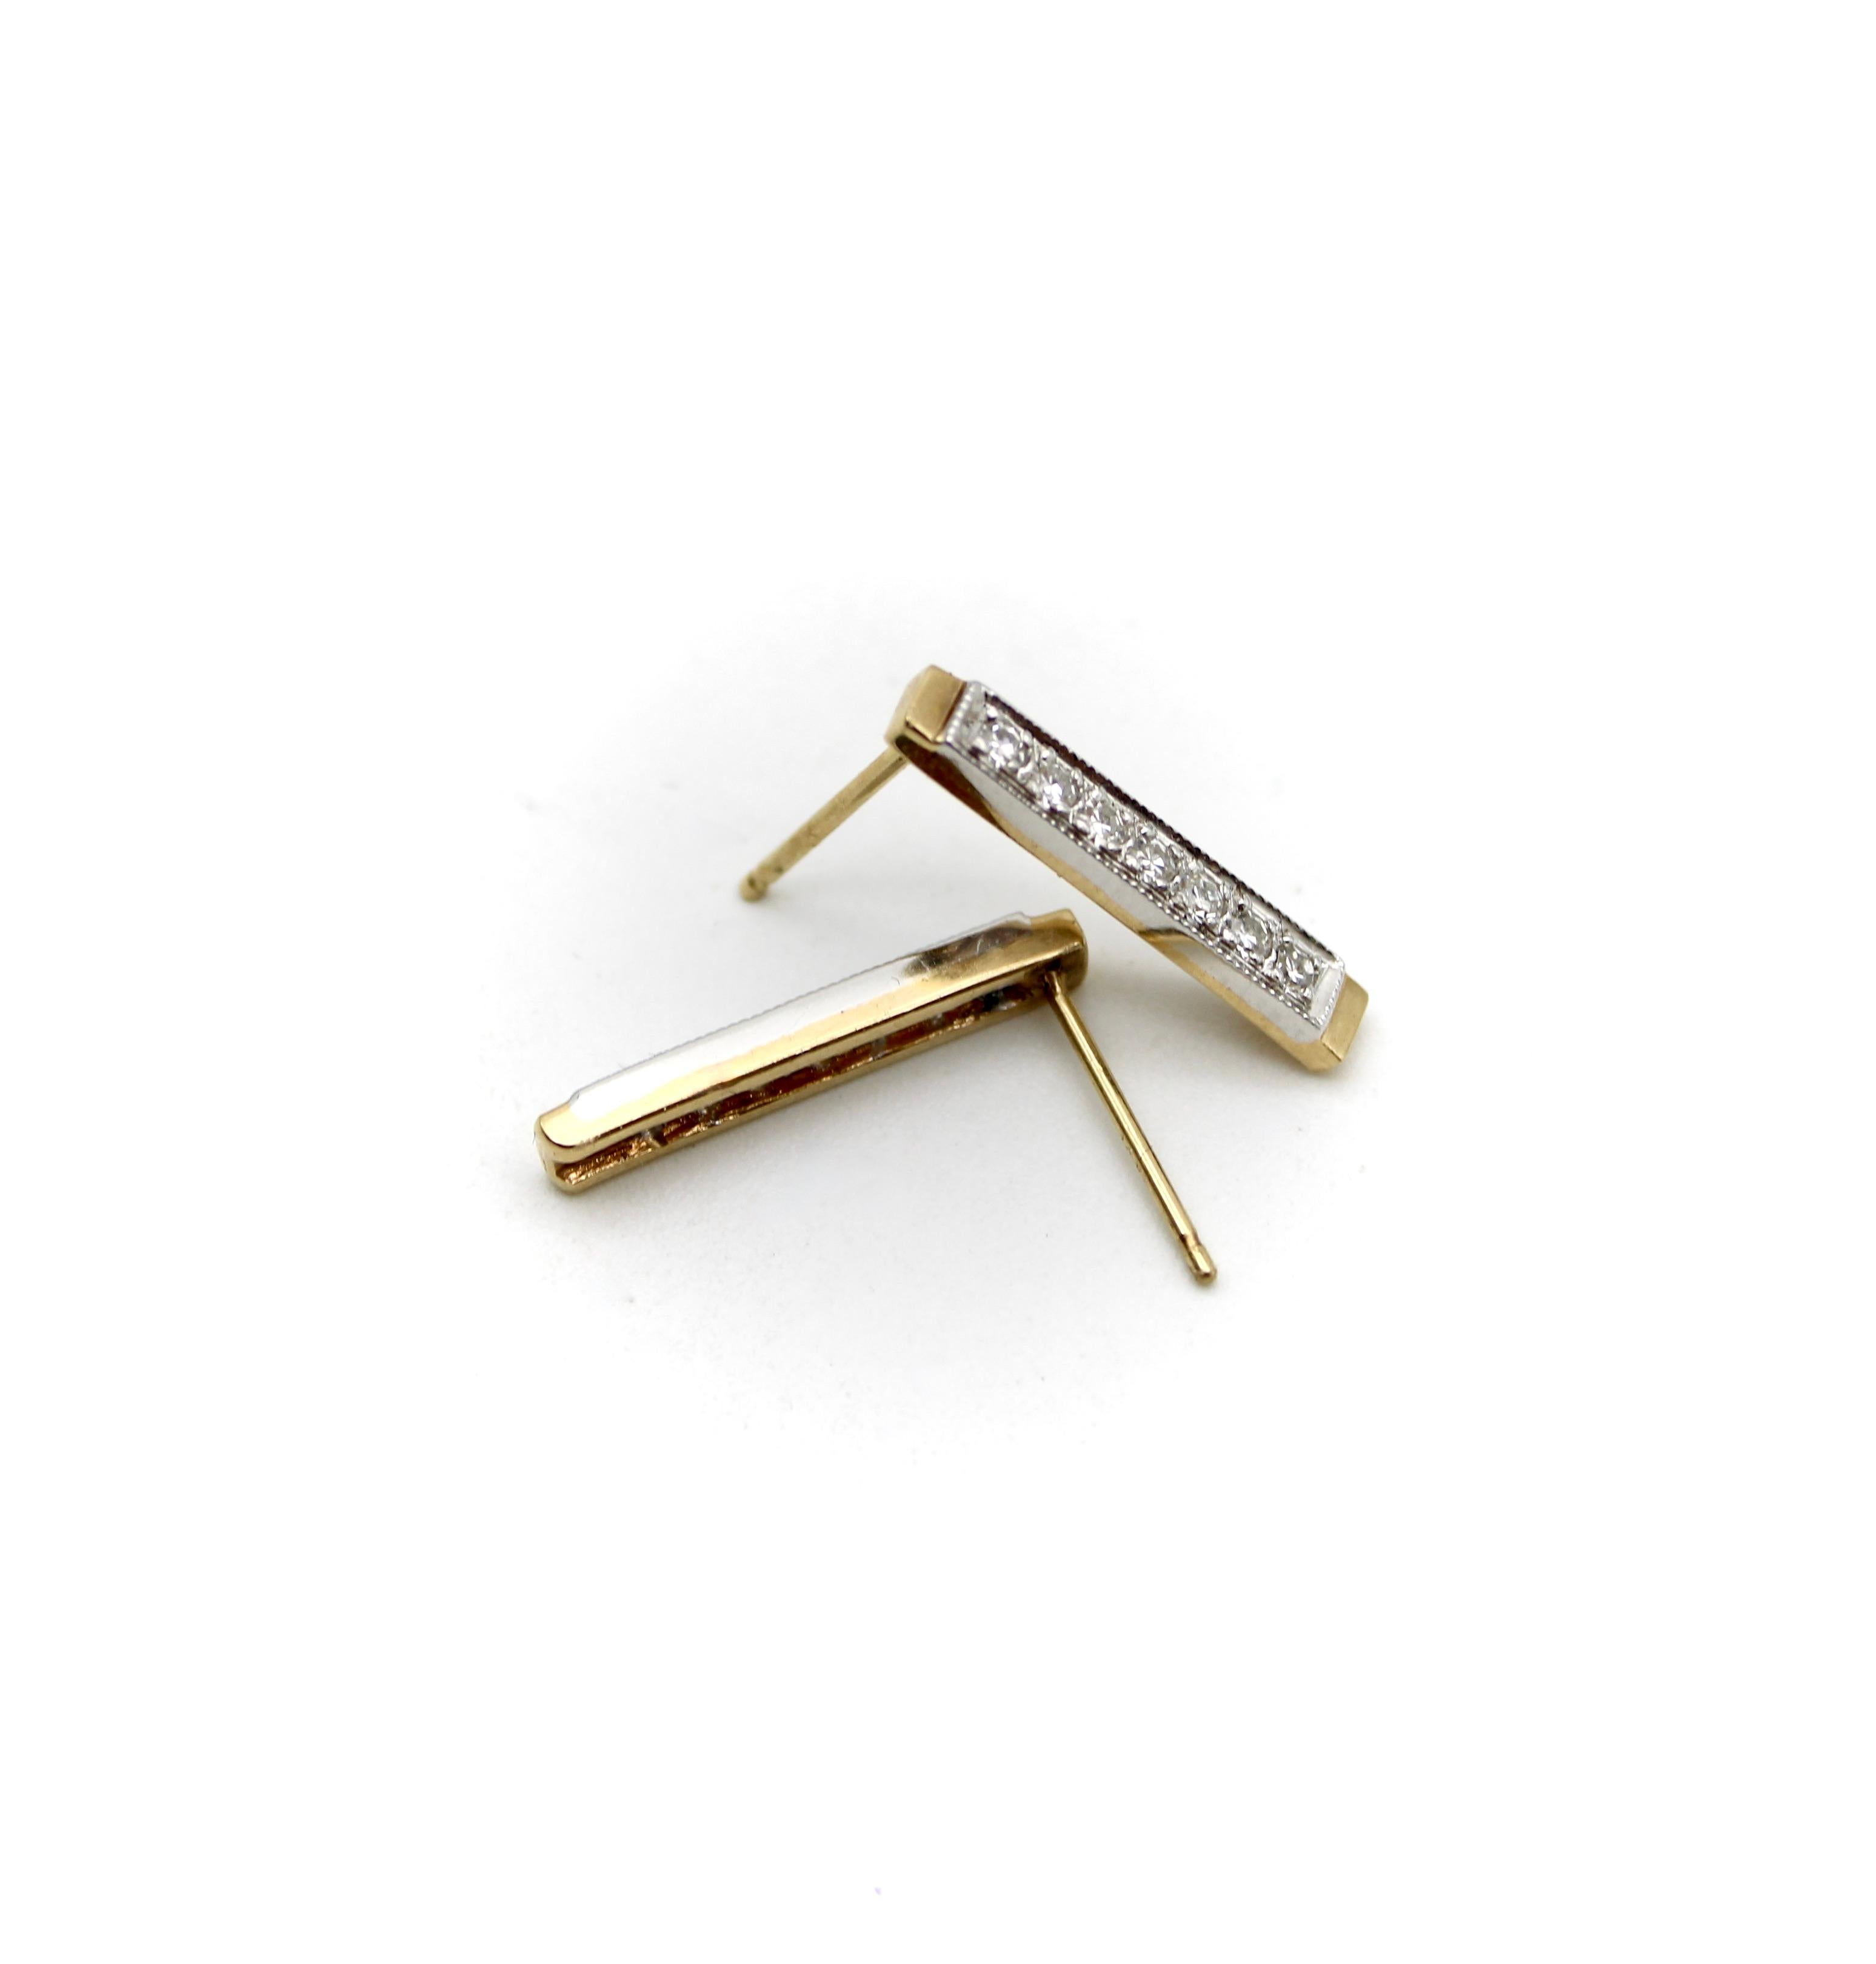 This is an elegant pair of diamond bar earrings. The earrings feature 14 karat yellow and white gold. They have angular lines and a retro, bar design with a line of bead set single cut diamonds. These earrings feature milgrain work along the edges